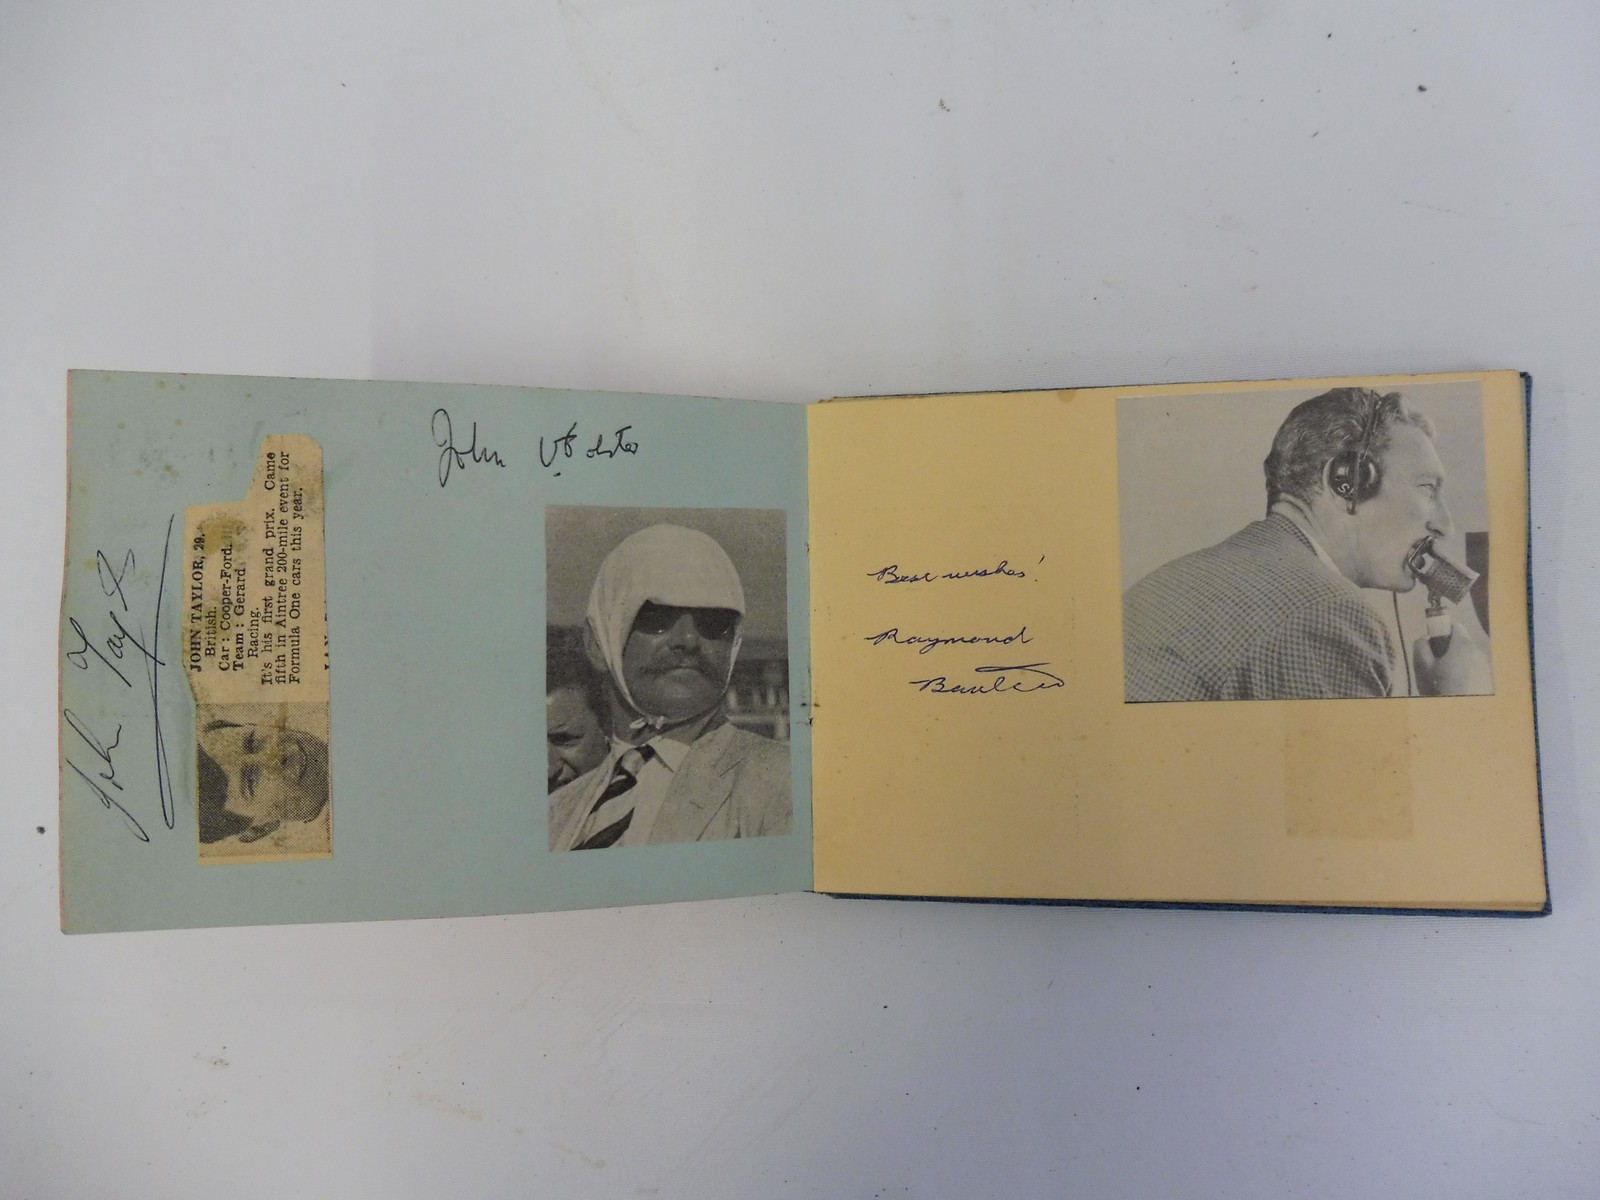 Two autograph albums containing an assortment of racing driver signatures including Jim Clark, - Image 7 of 12